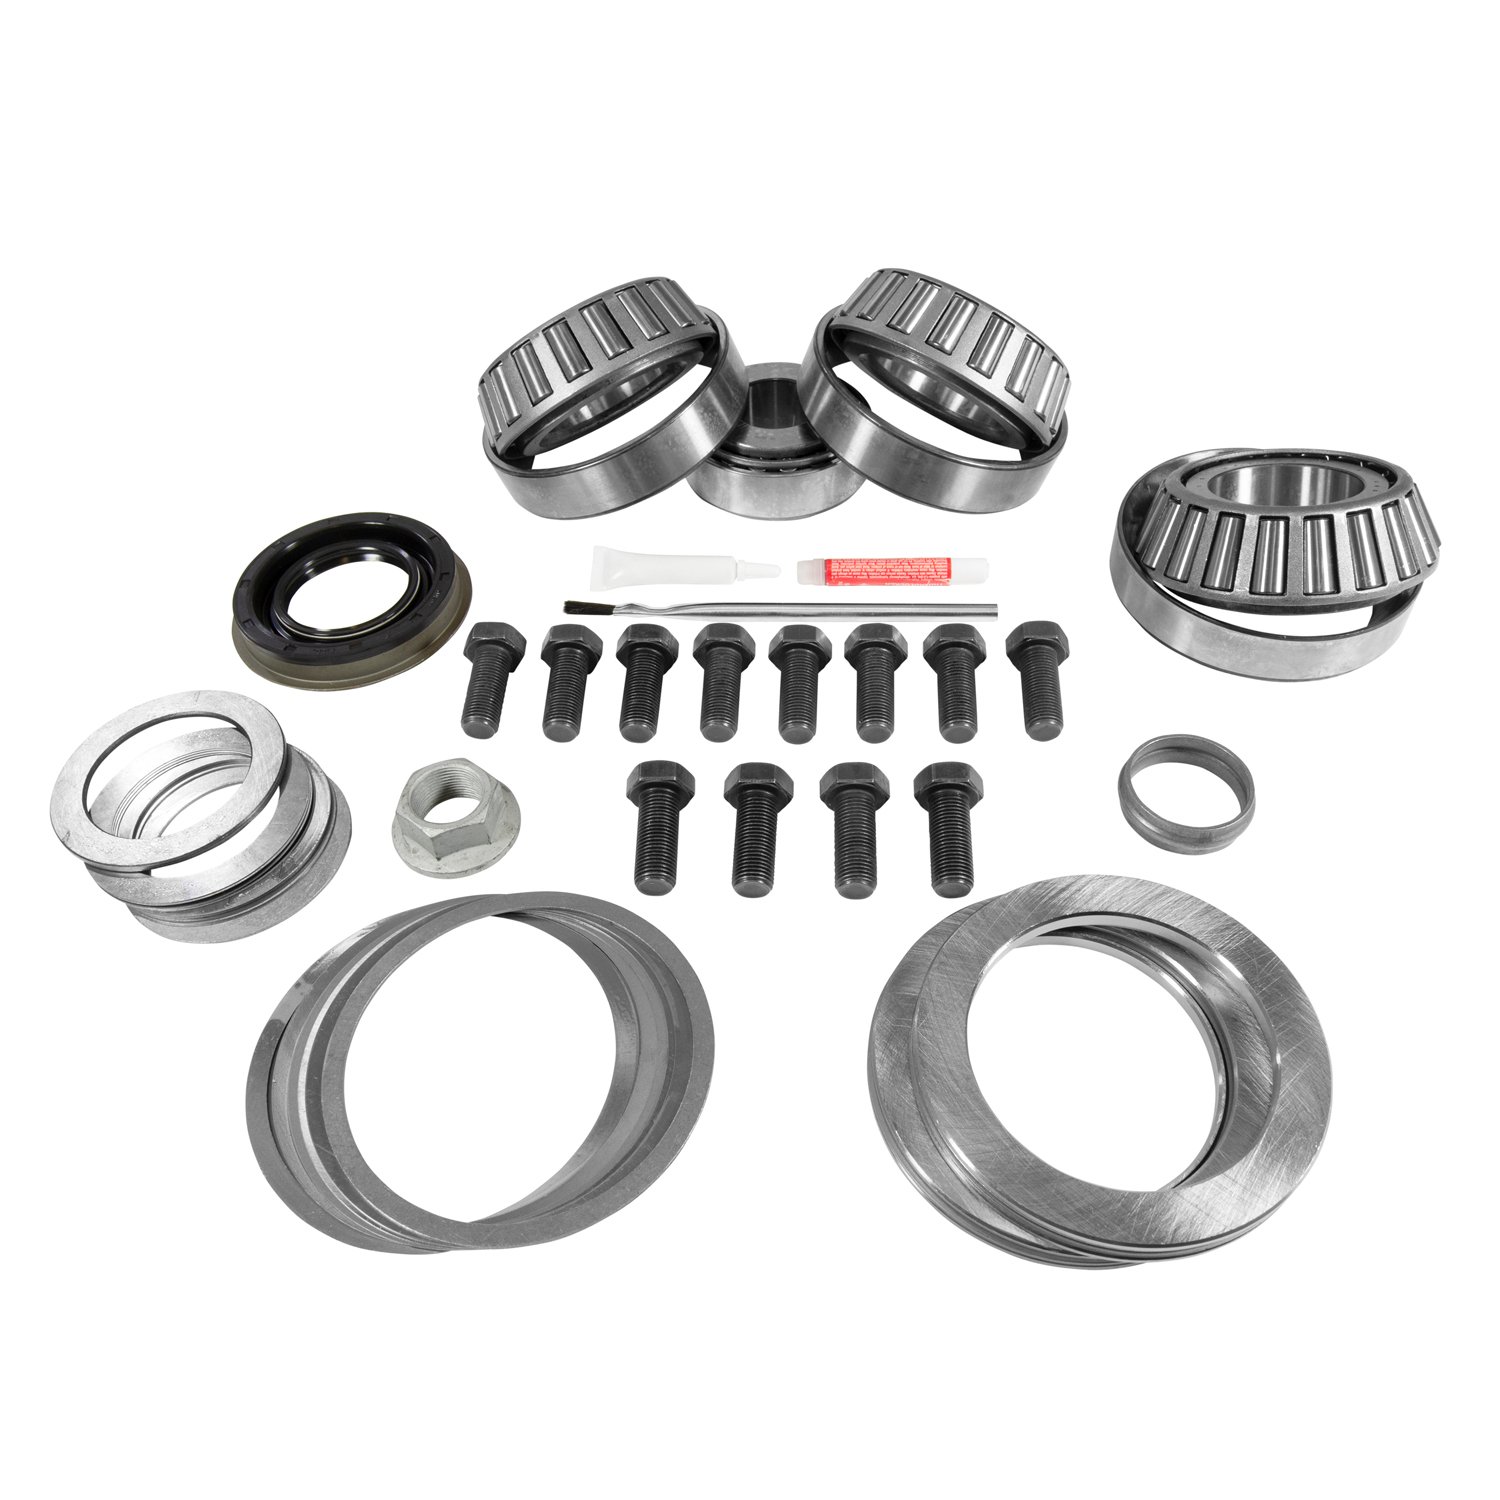 USA Standard ZK F10.5-A Master Overhaul Kit, For '07 & Down Ford 10.5 Differential